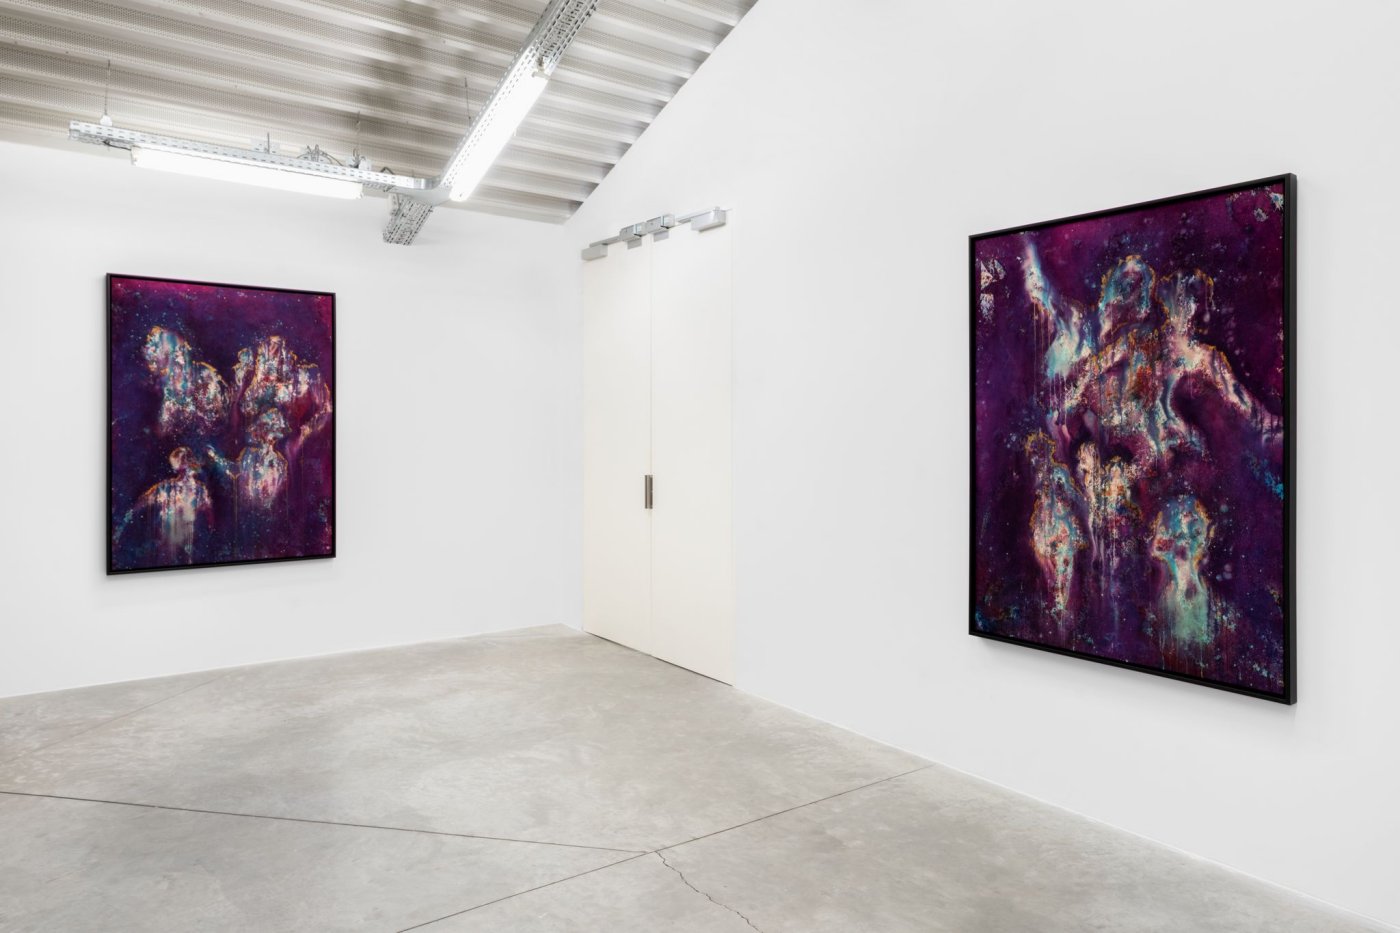 Installation image for Alexis McGrigg: In The Beloved, at Almine Rech